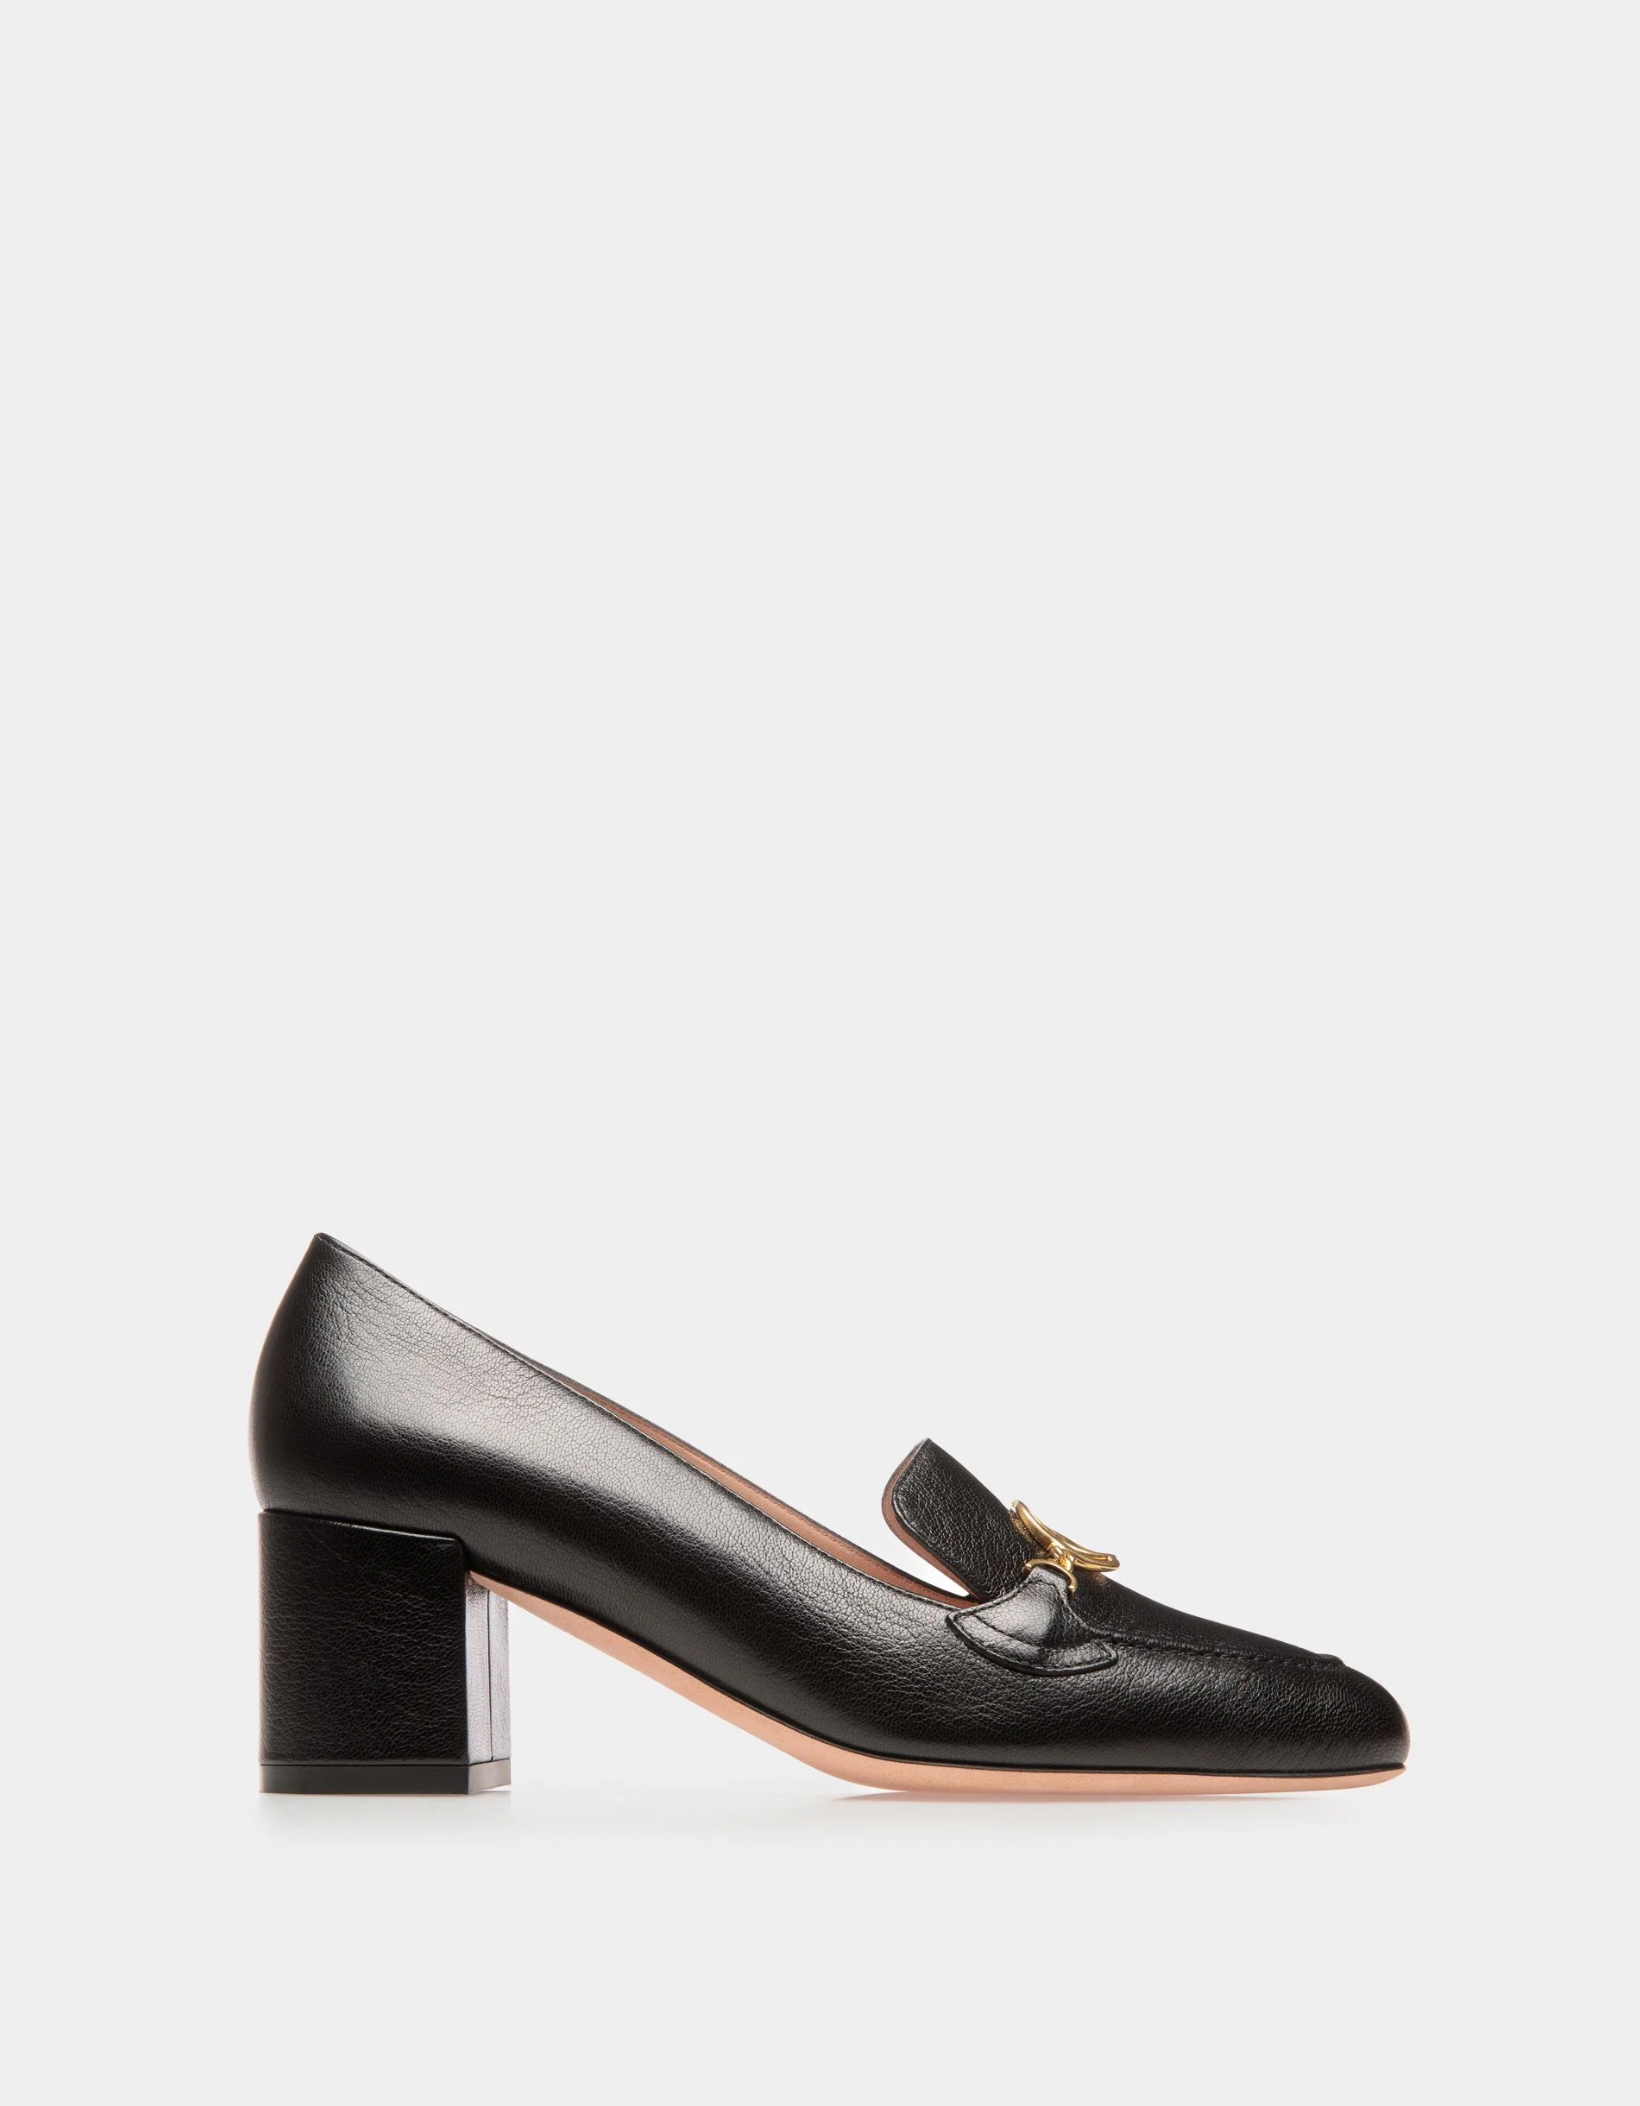 the same shoe as Bally Janelle Loafers; find a white pair like this black version on their website